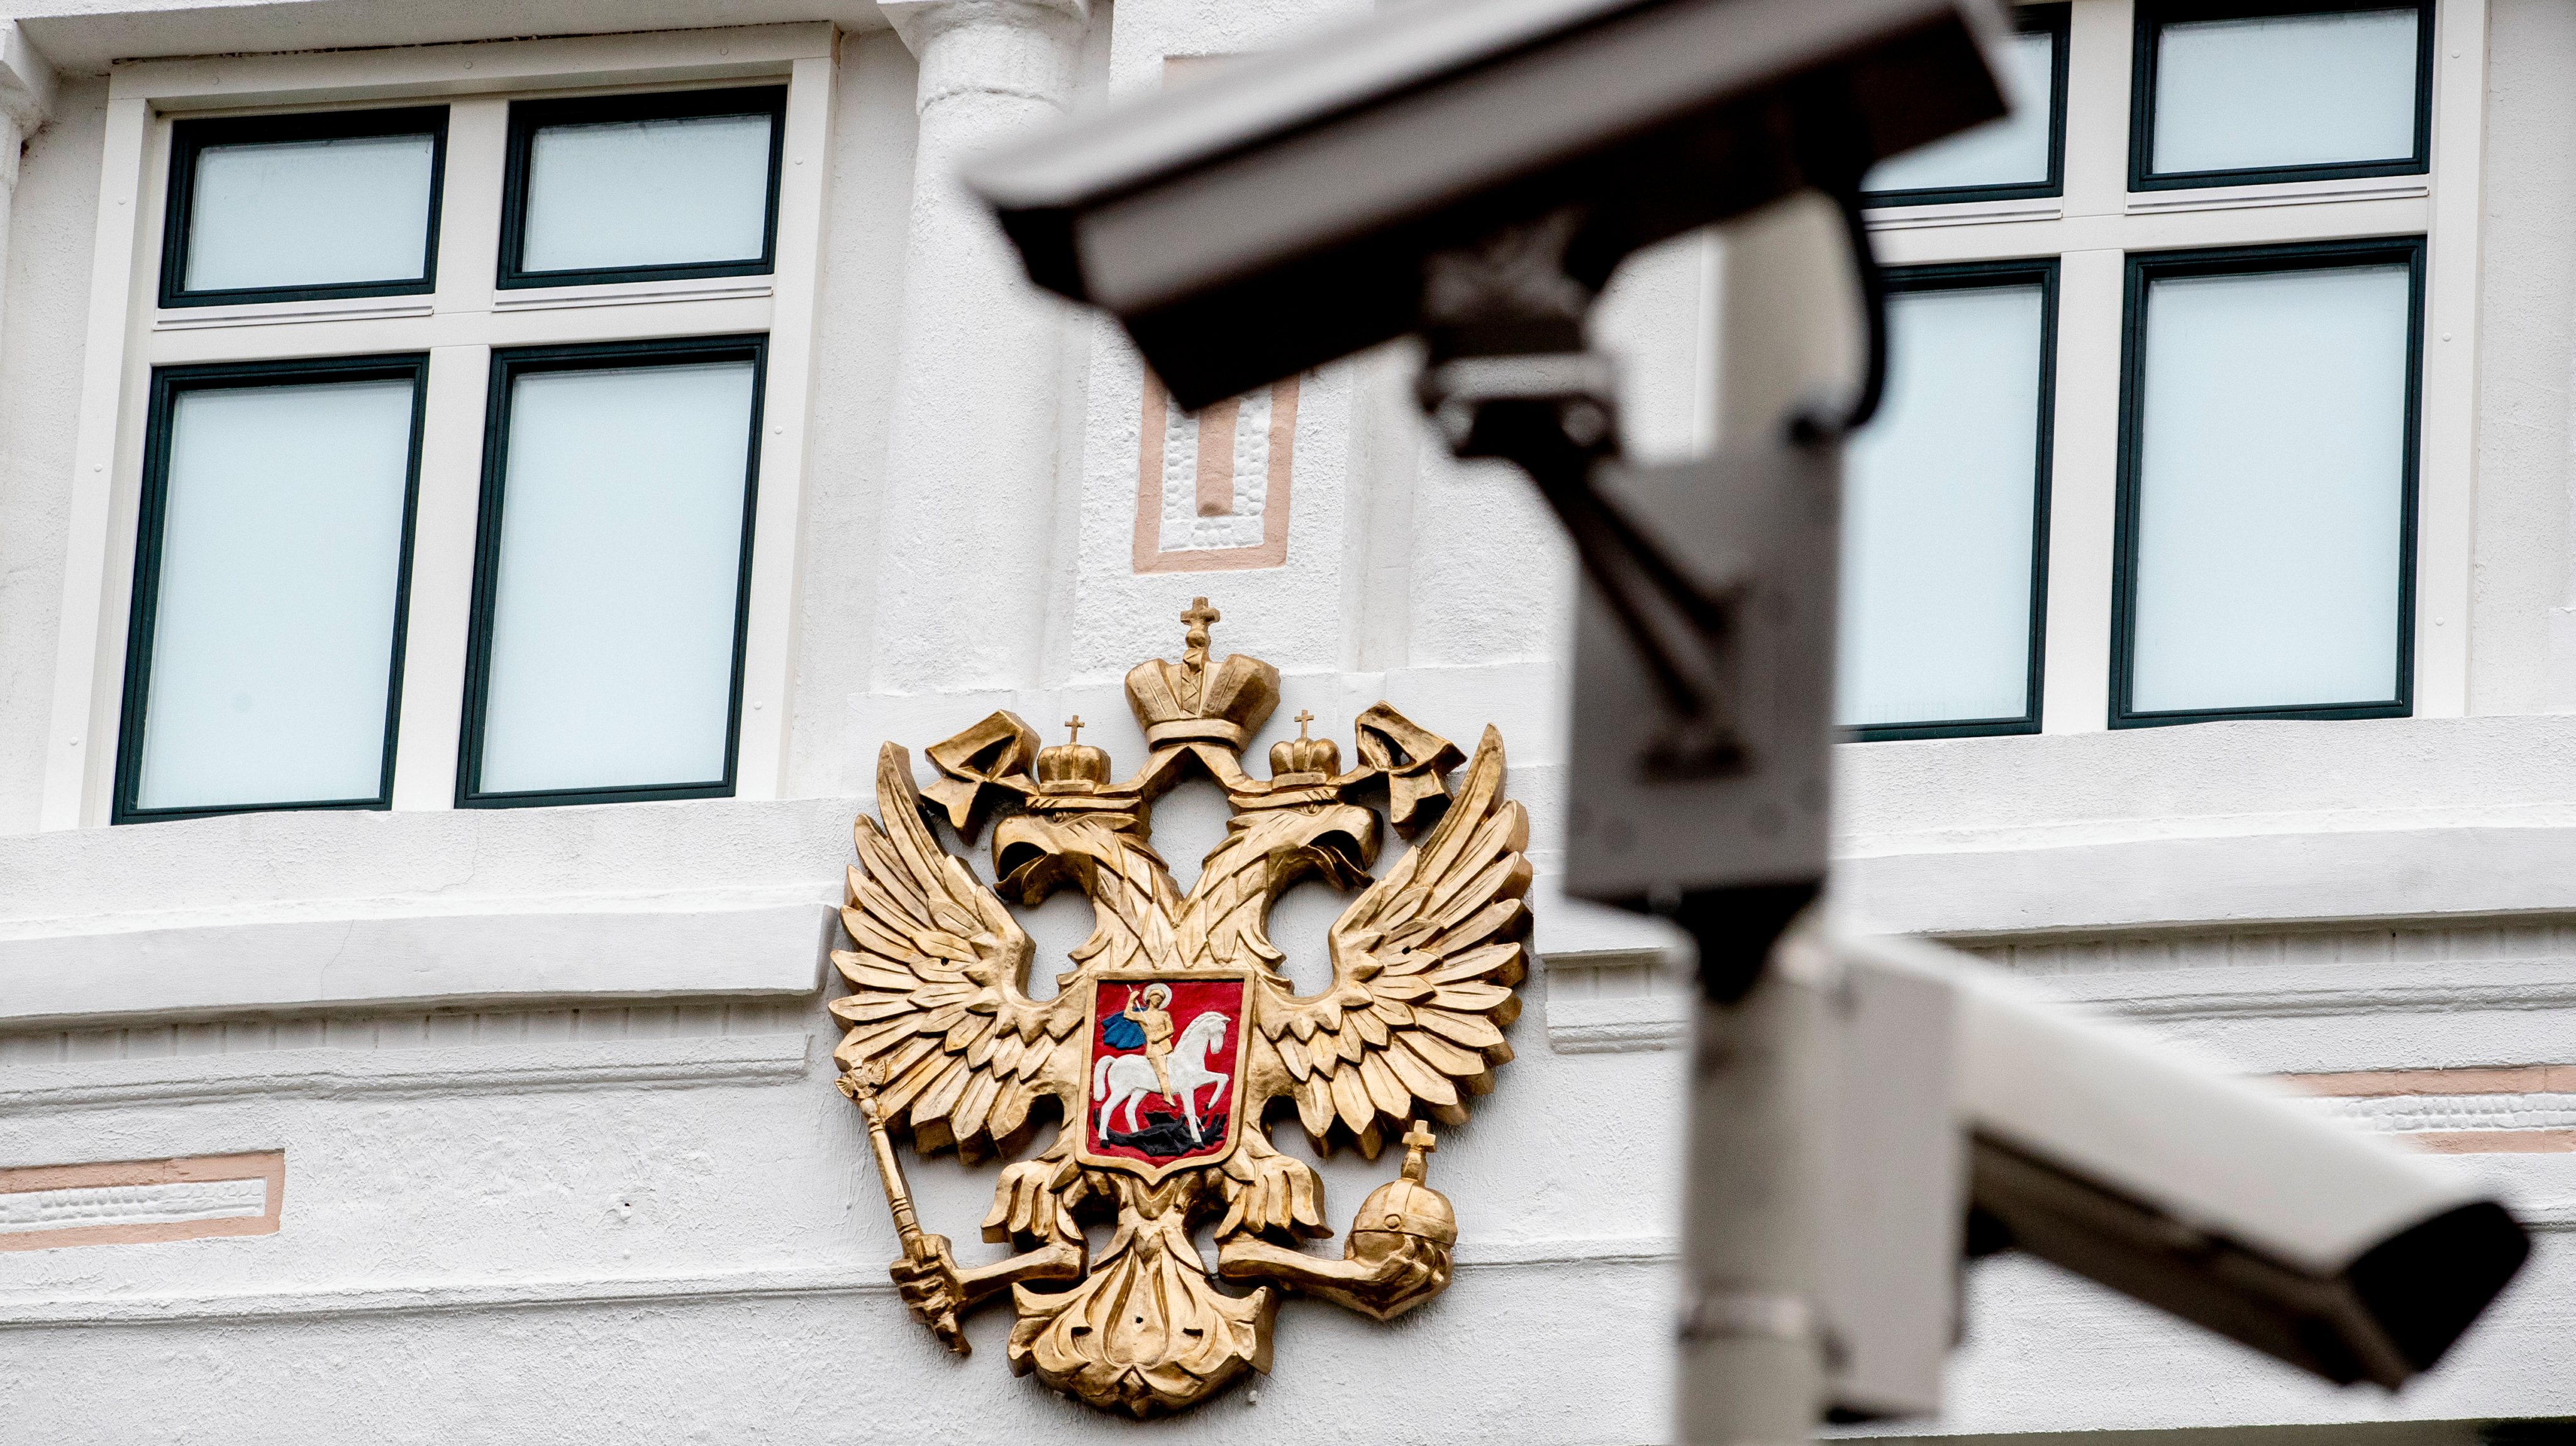 Two Russian diplomats expelled from Netherlands because of espionage